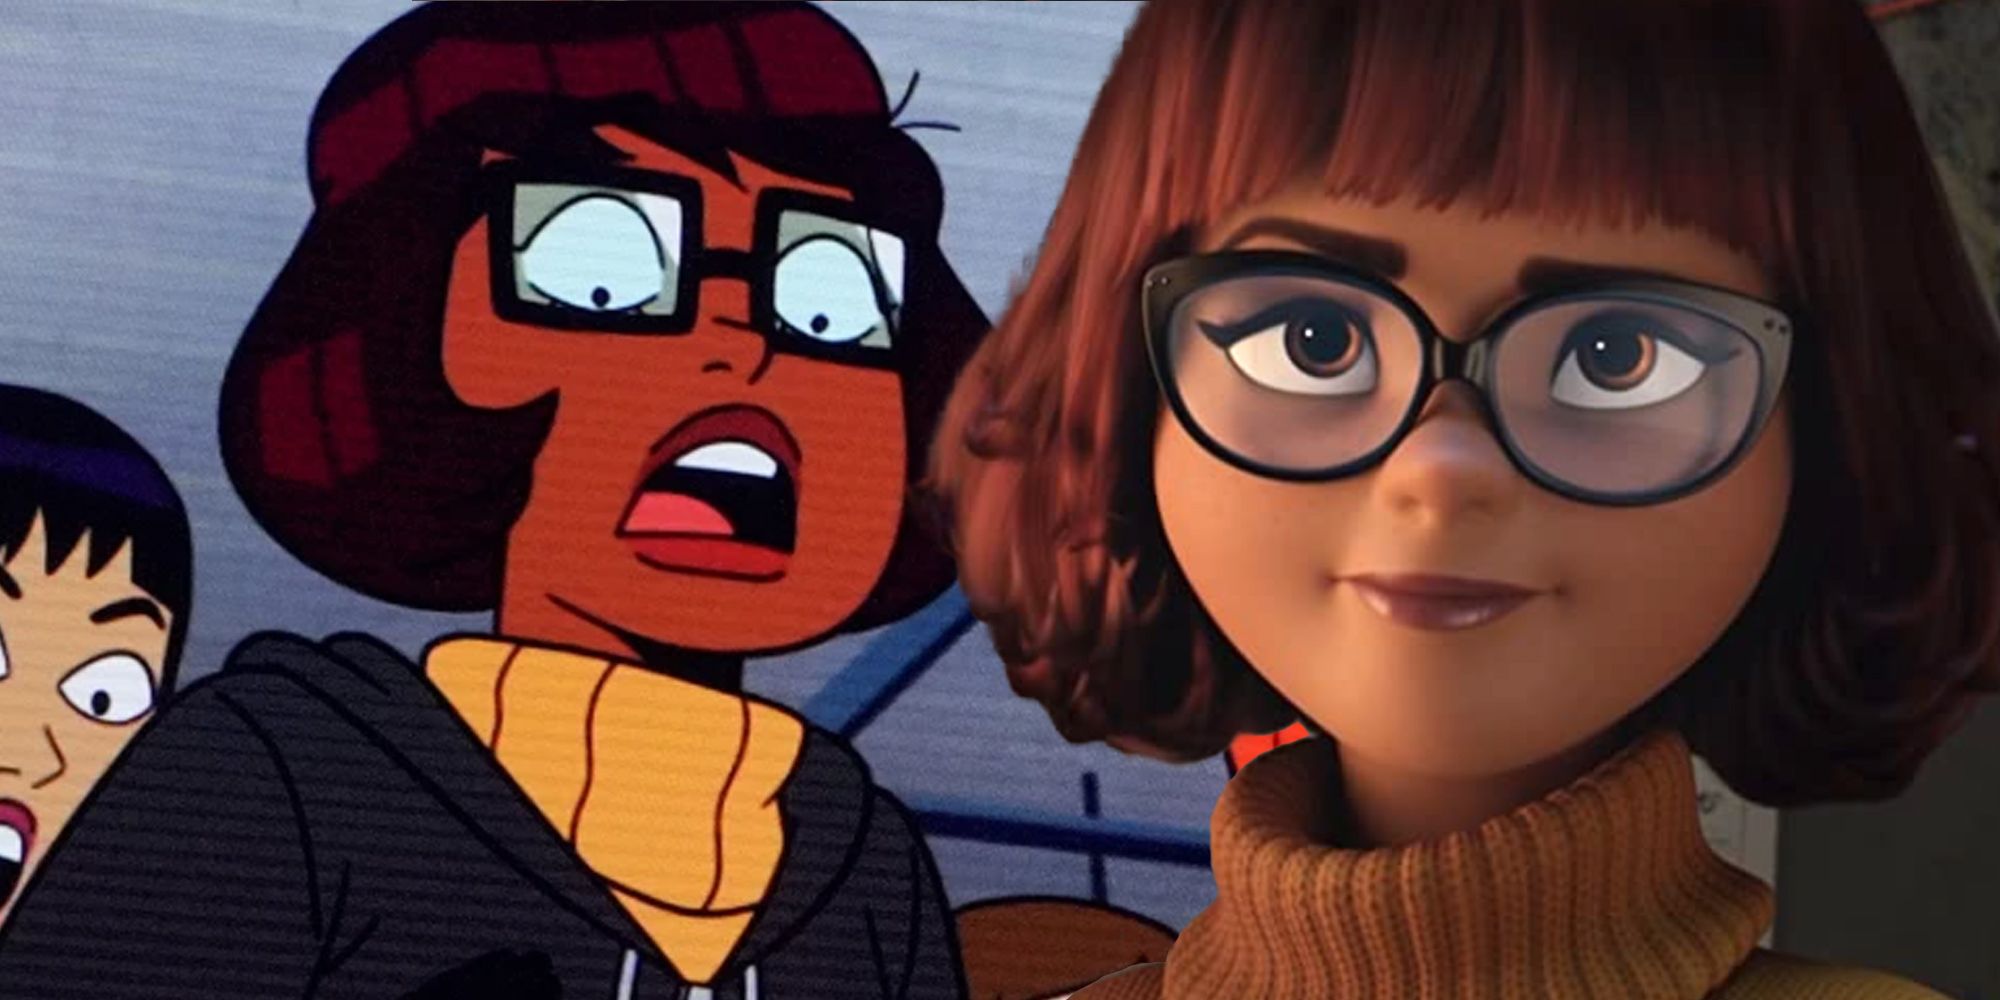 Velma' HBO Max's Scooby-Doo Spinoff Trailer, Release Date